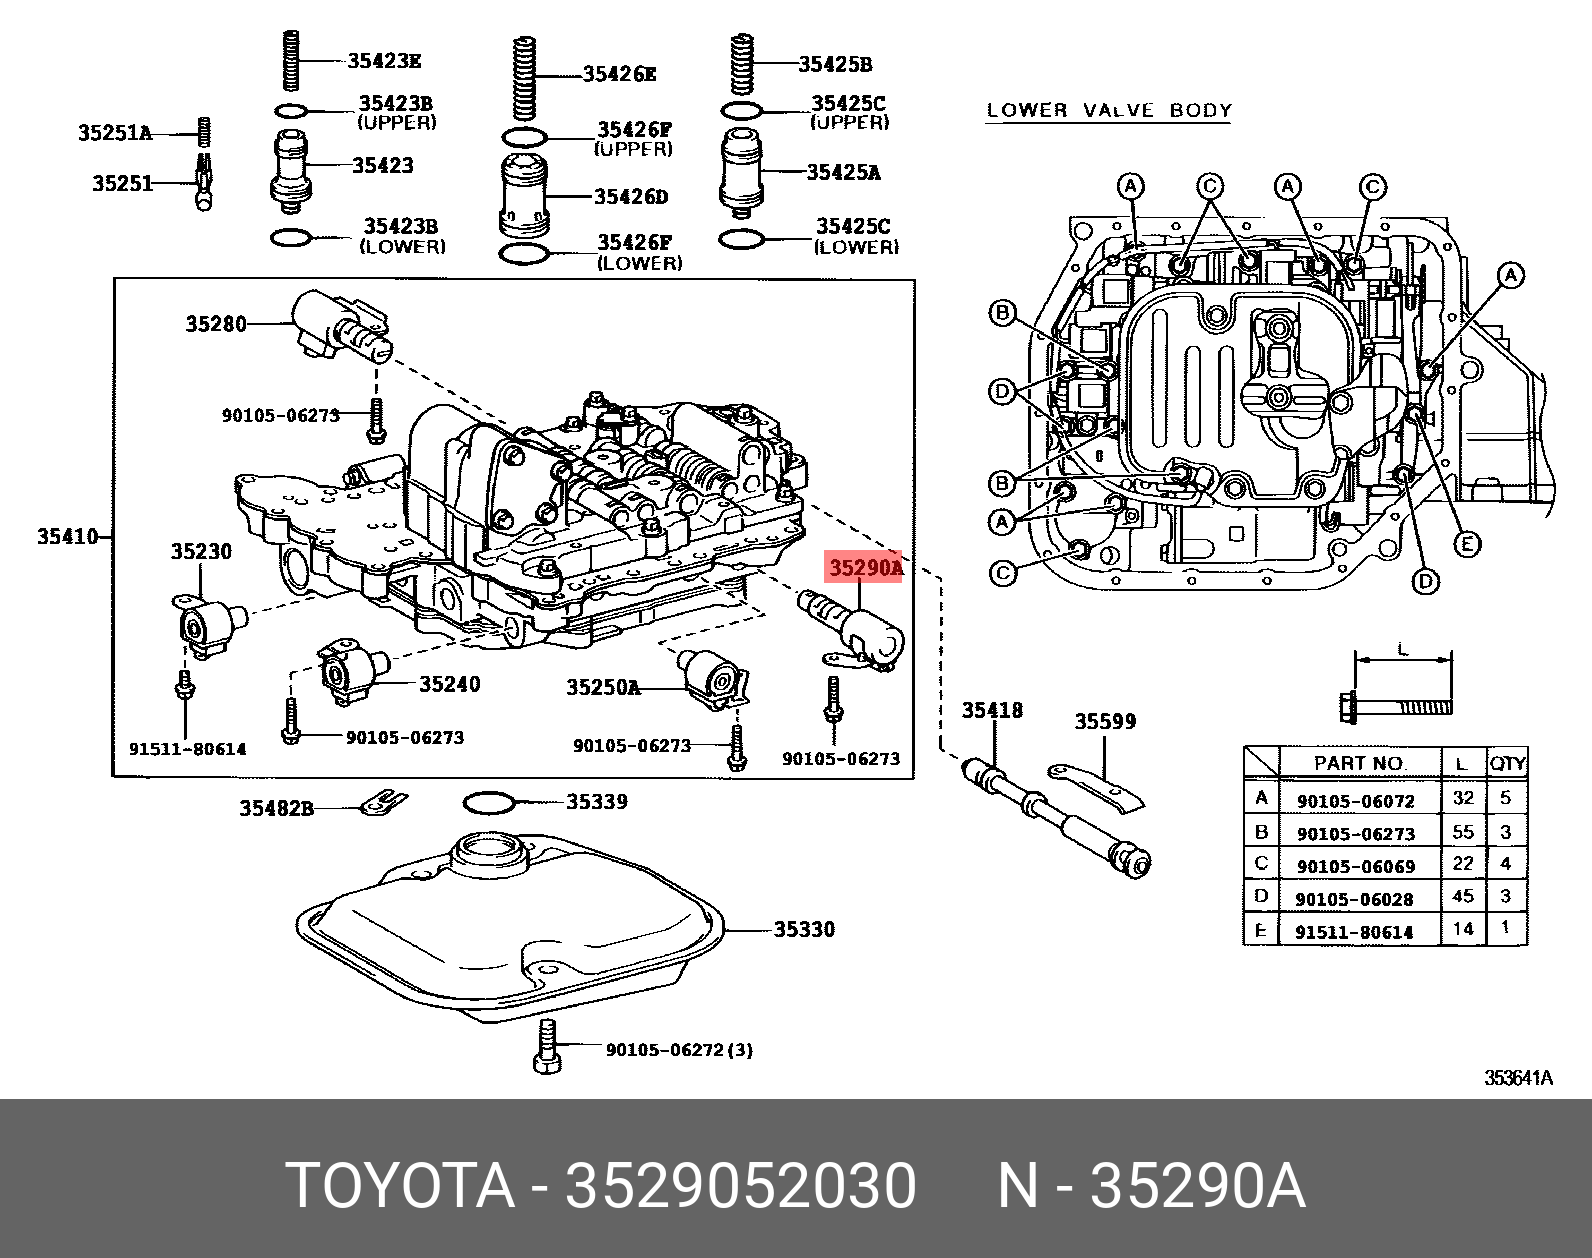 WILL CYPHA 200209 - 200507, SOLENOID ASSY, LINE PRESSURE CONTROL